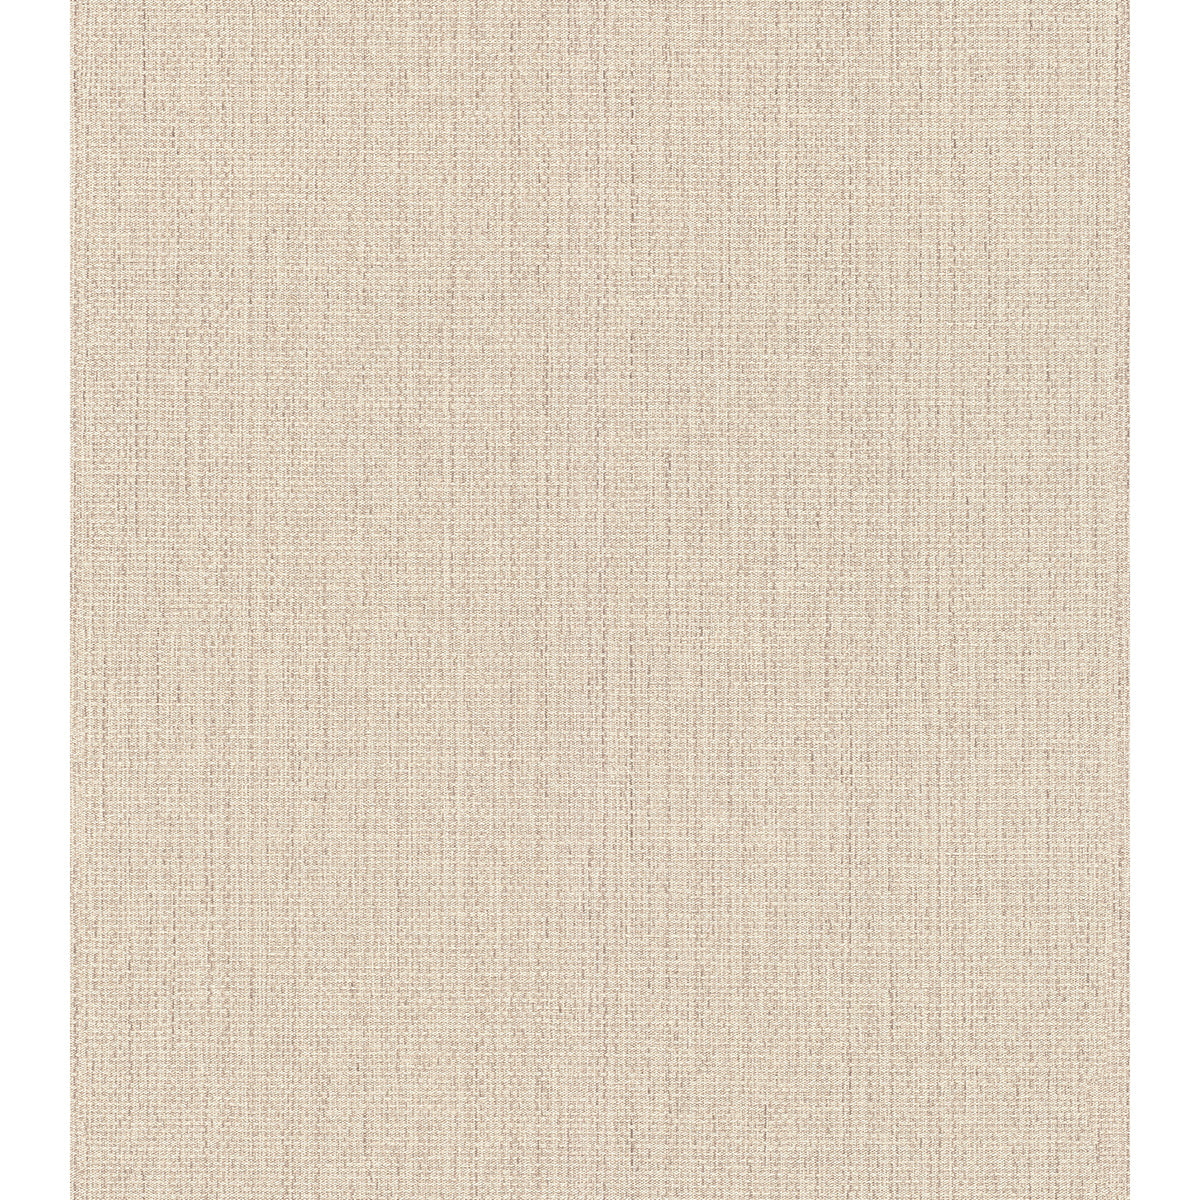 Neutral Faux Woven Fabric